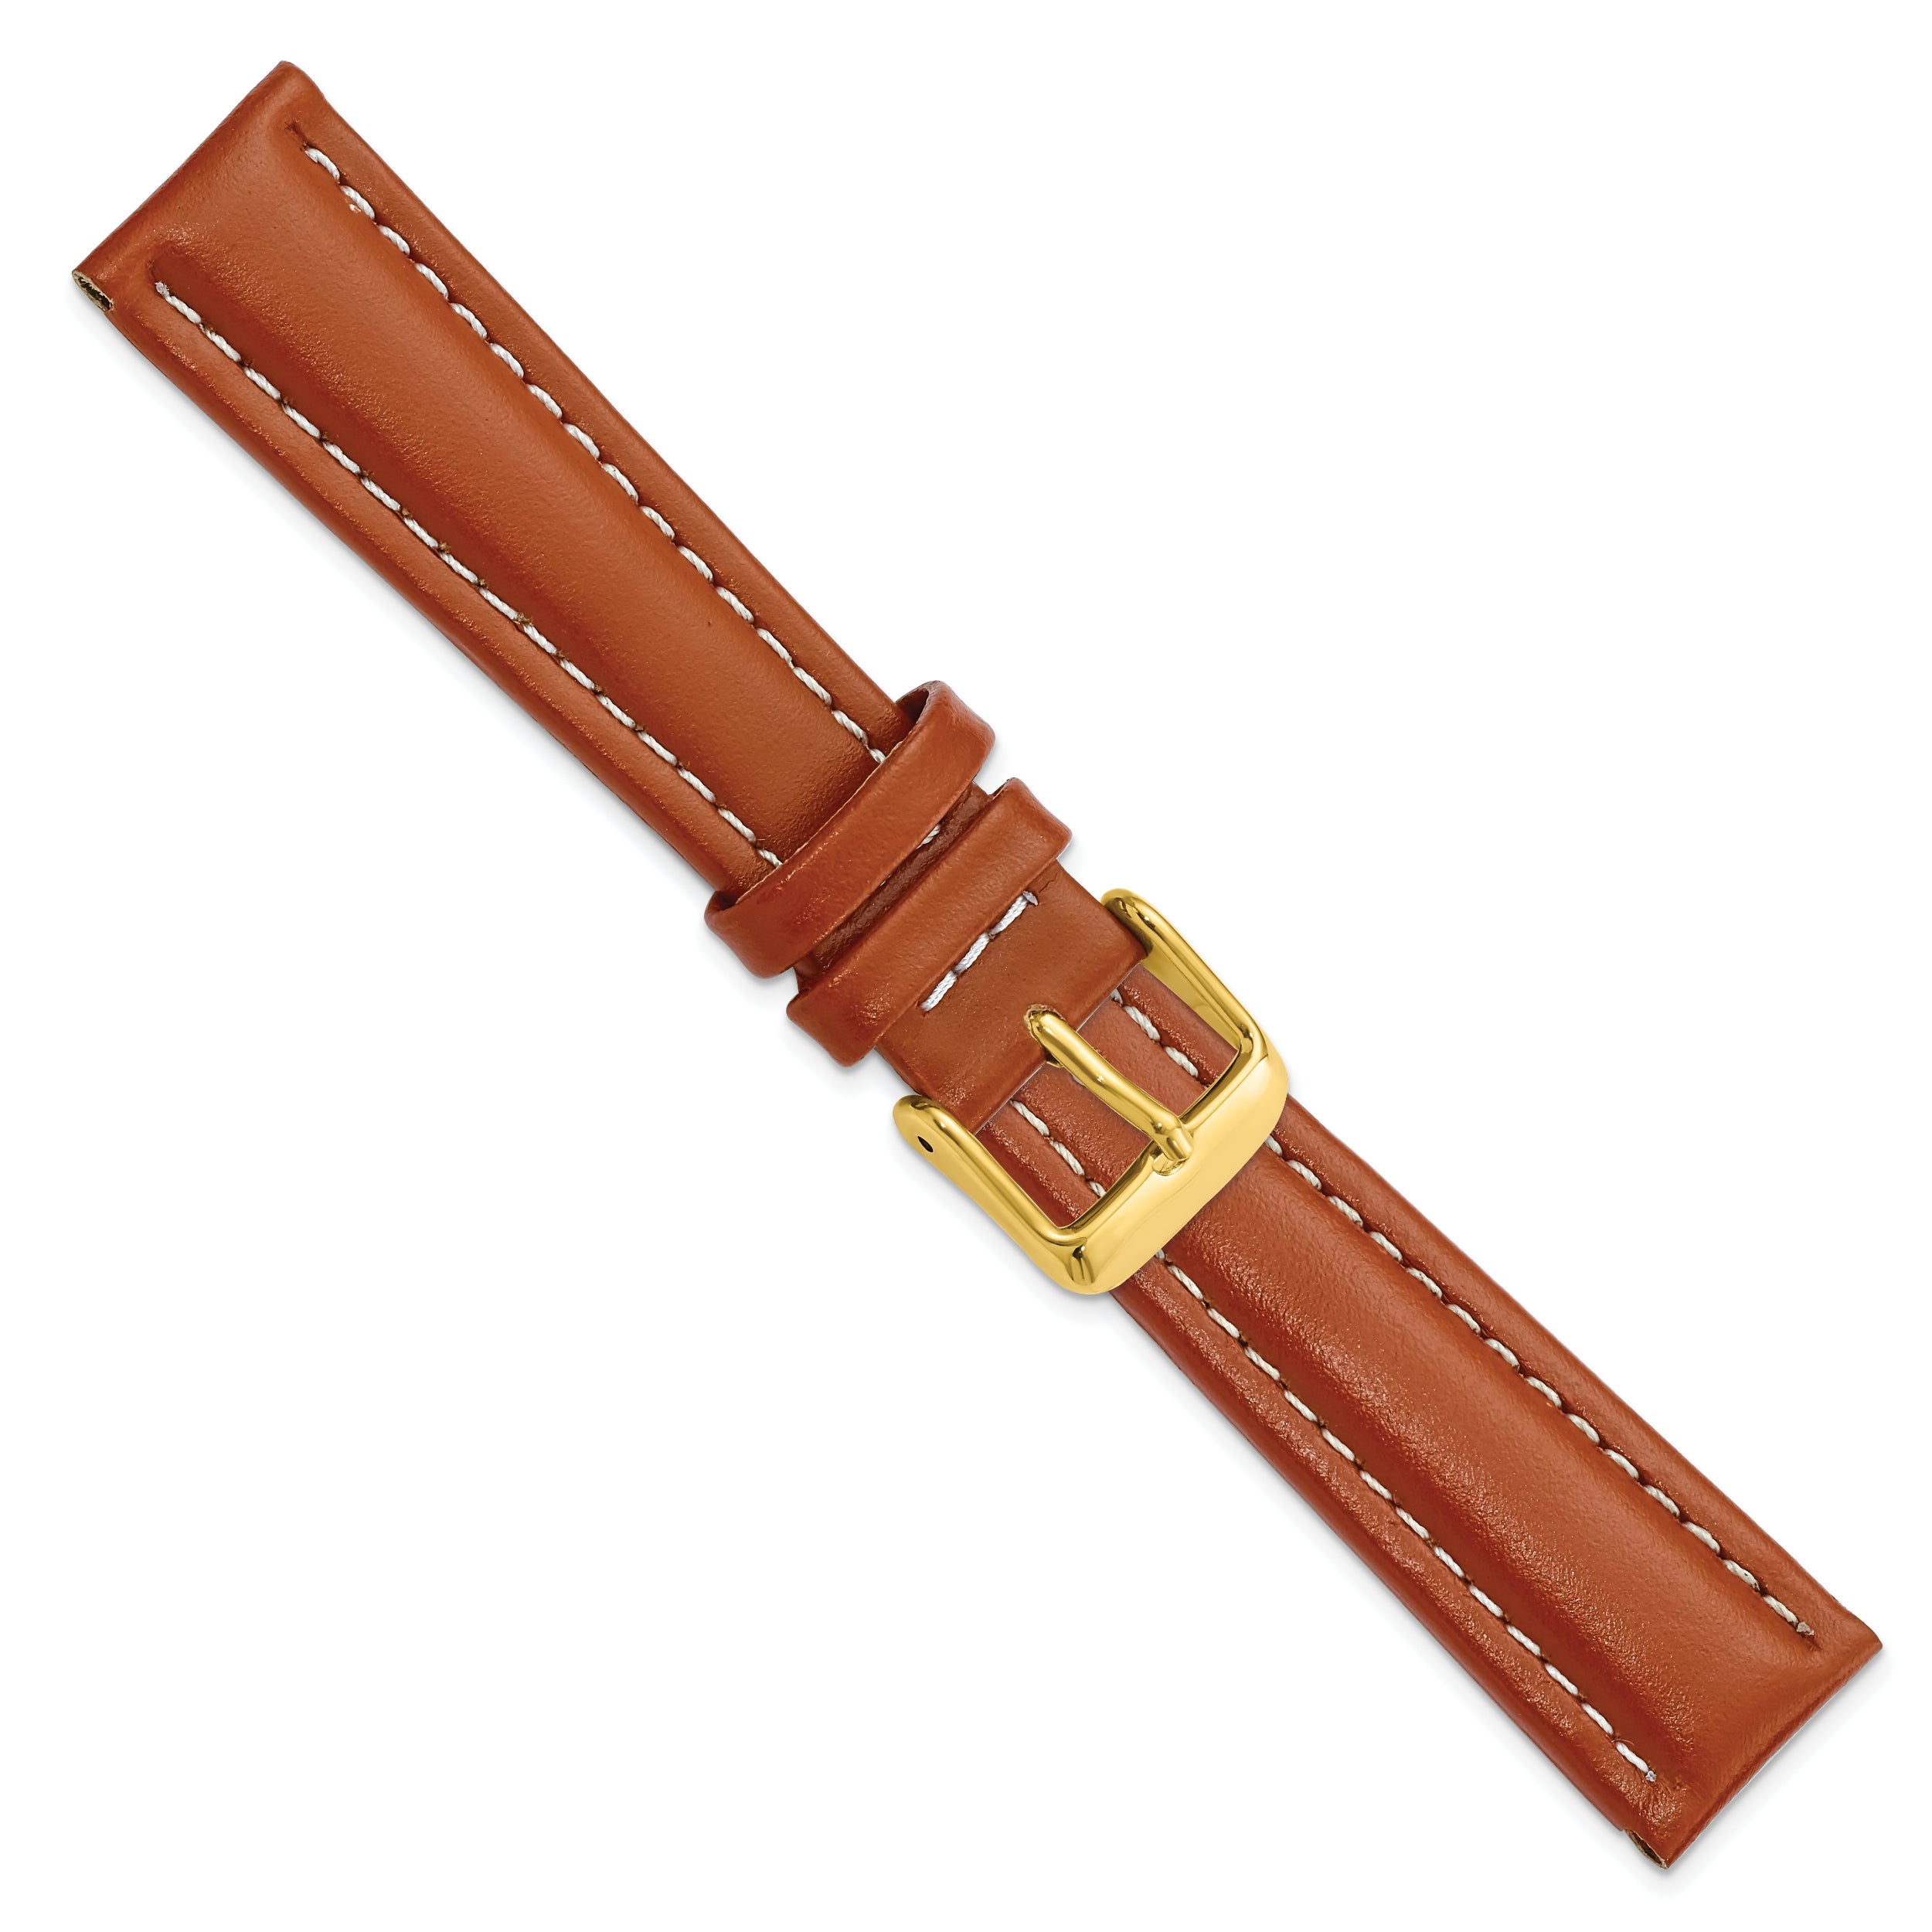 14mm Saddle Brown Oil-tanned Leather with White Stitching and Gold-tone Buckle 6.75 inch Watch Band